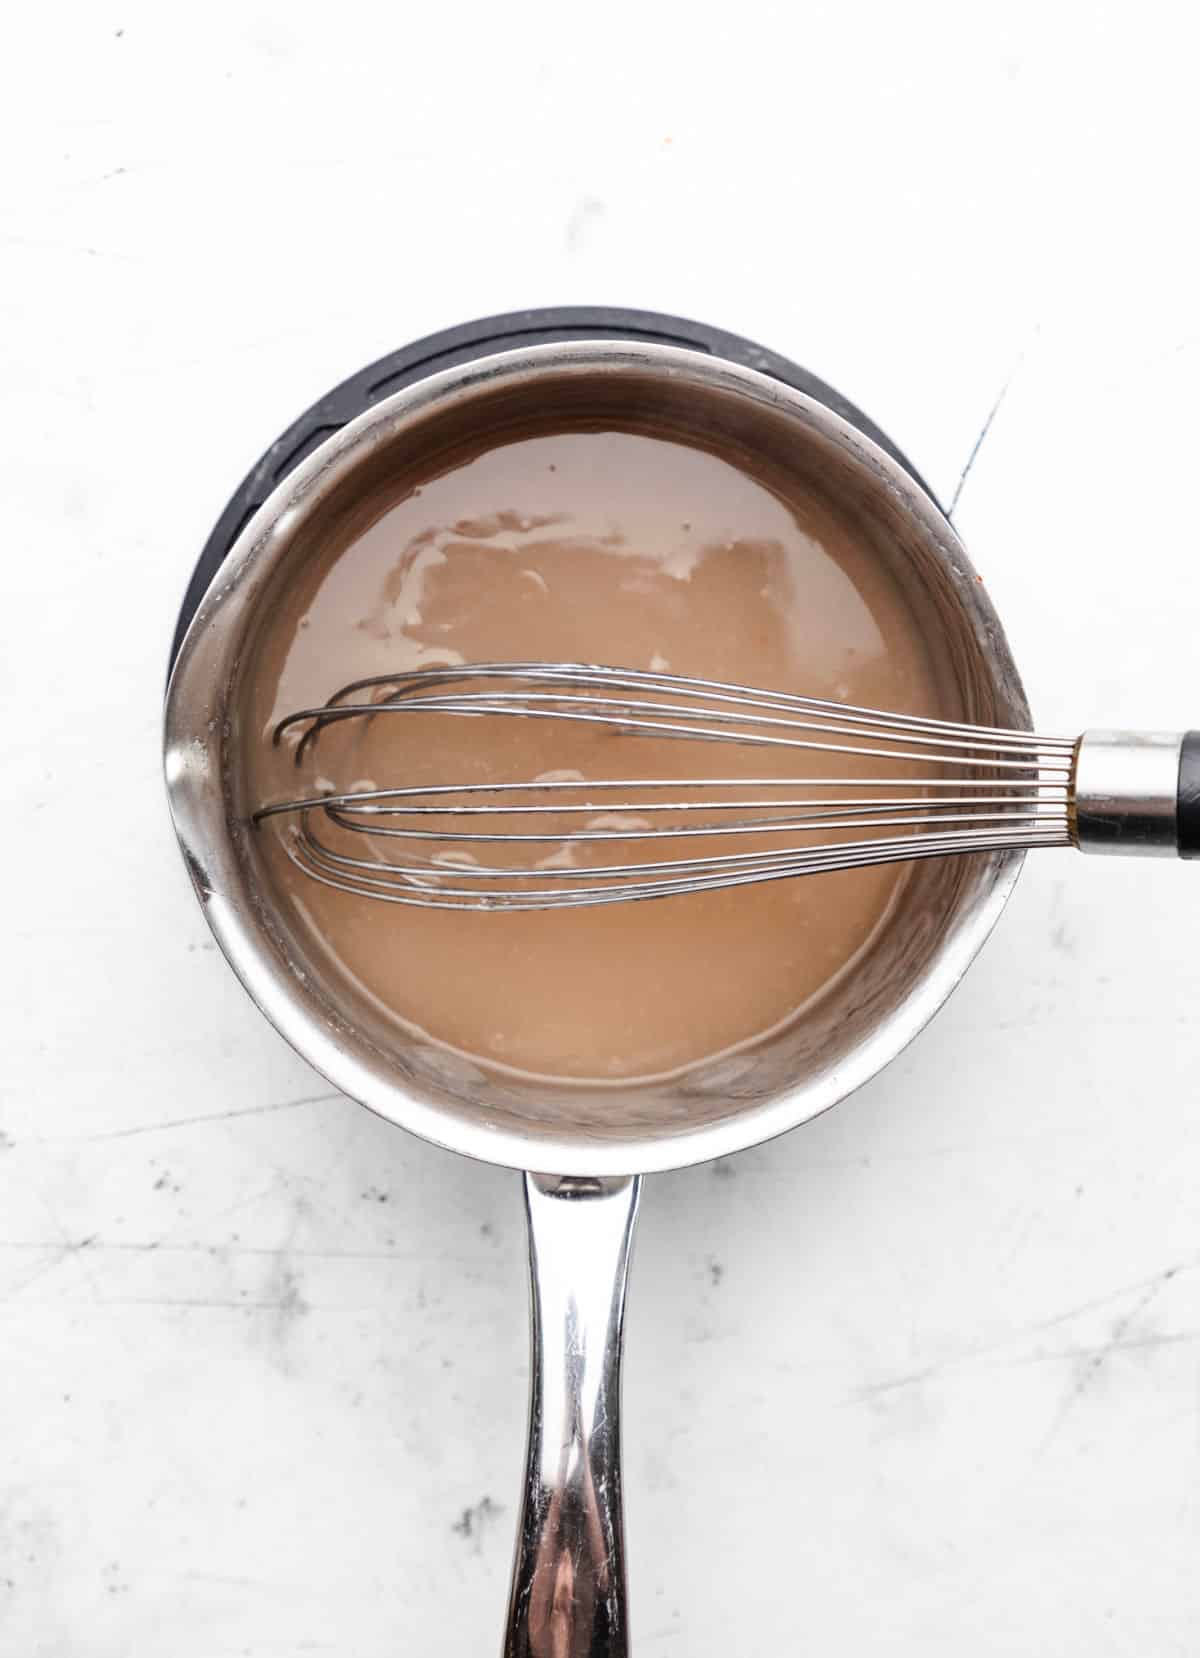 Vanilla sauce for steamed pudding in a silver saucepan.